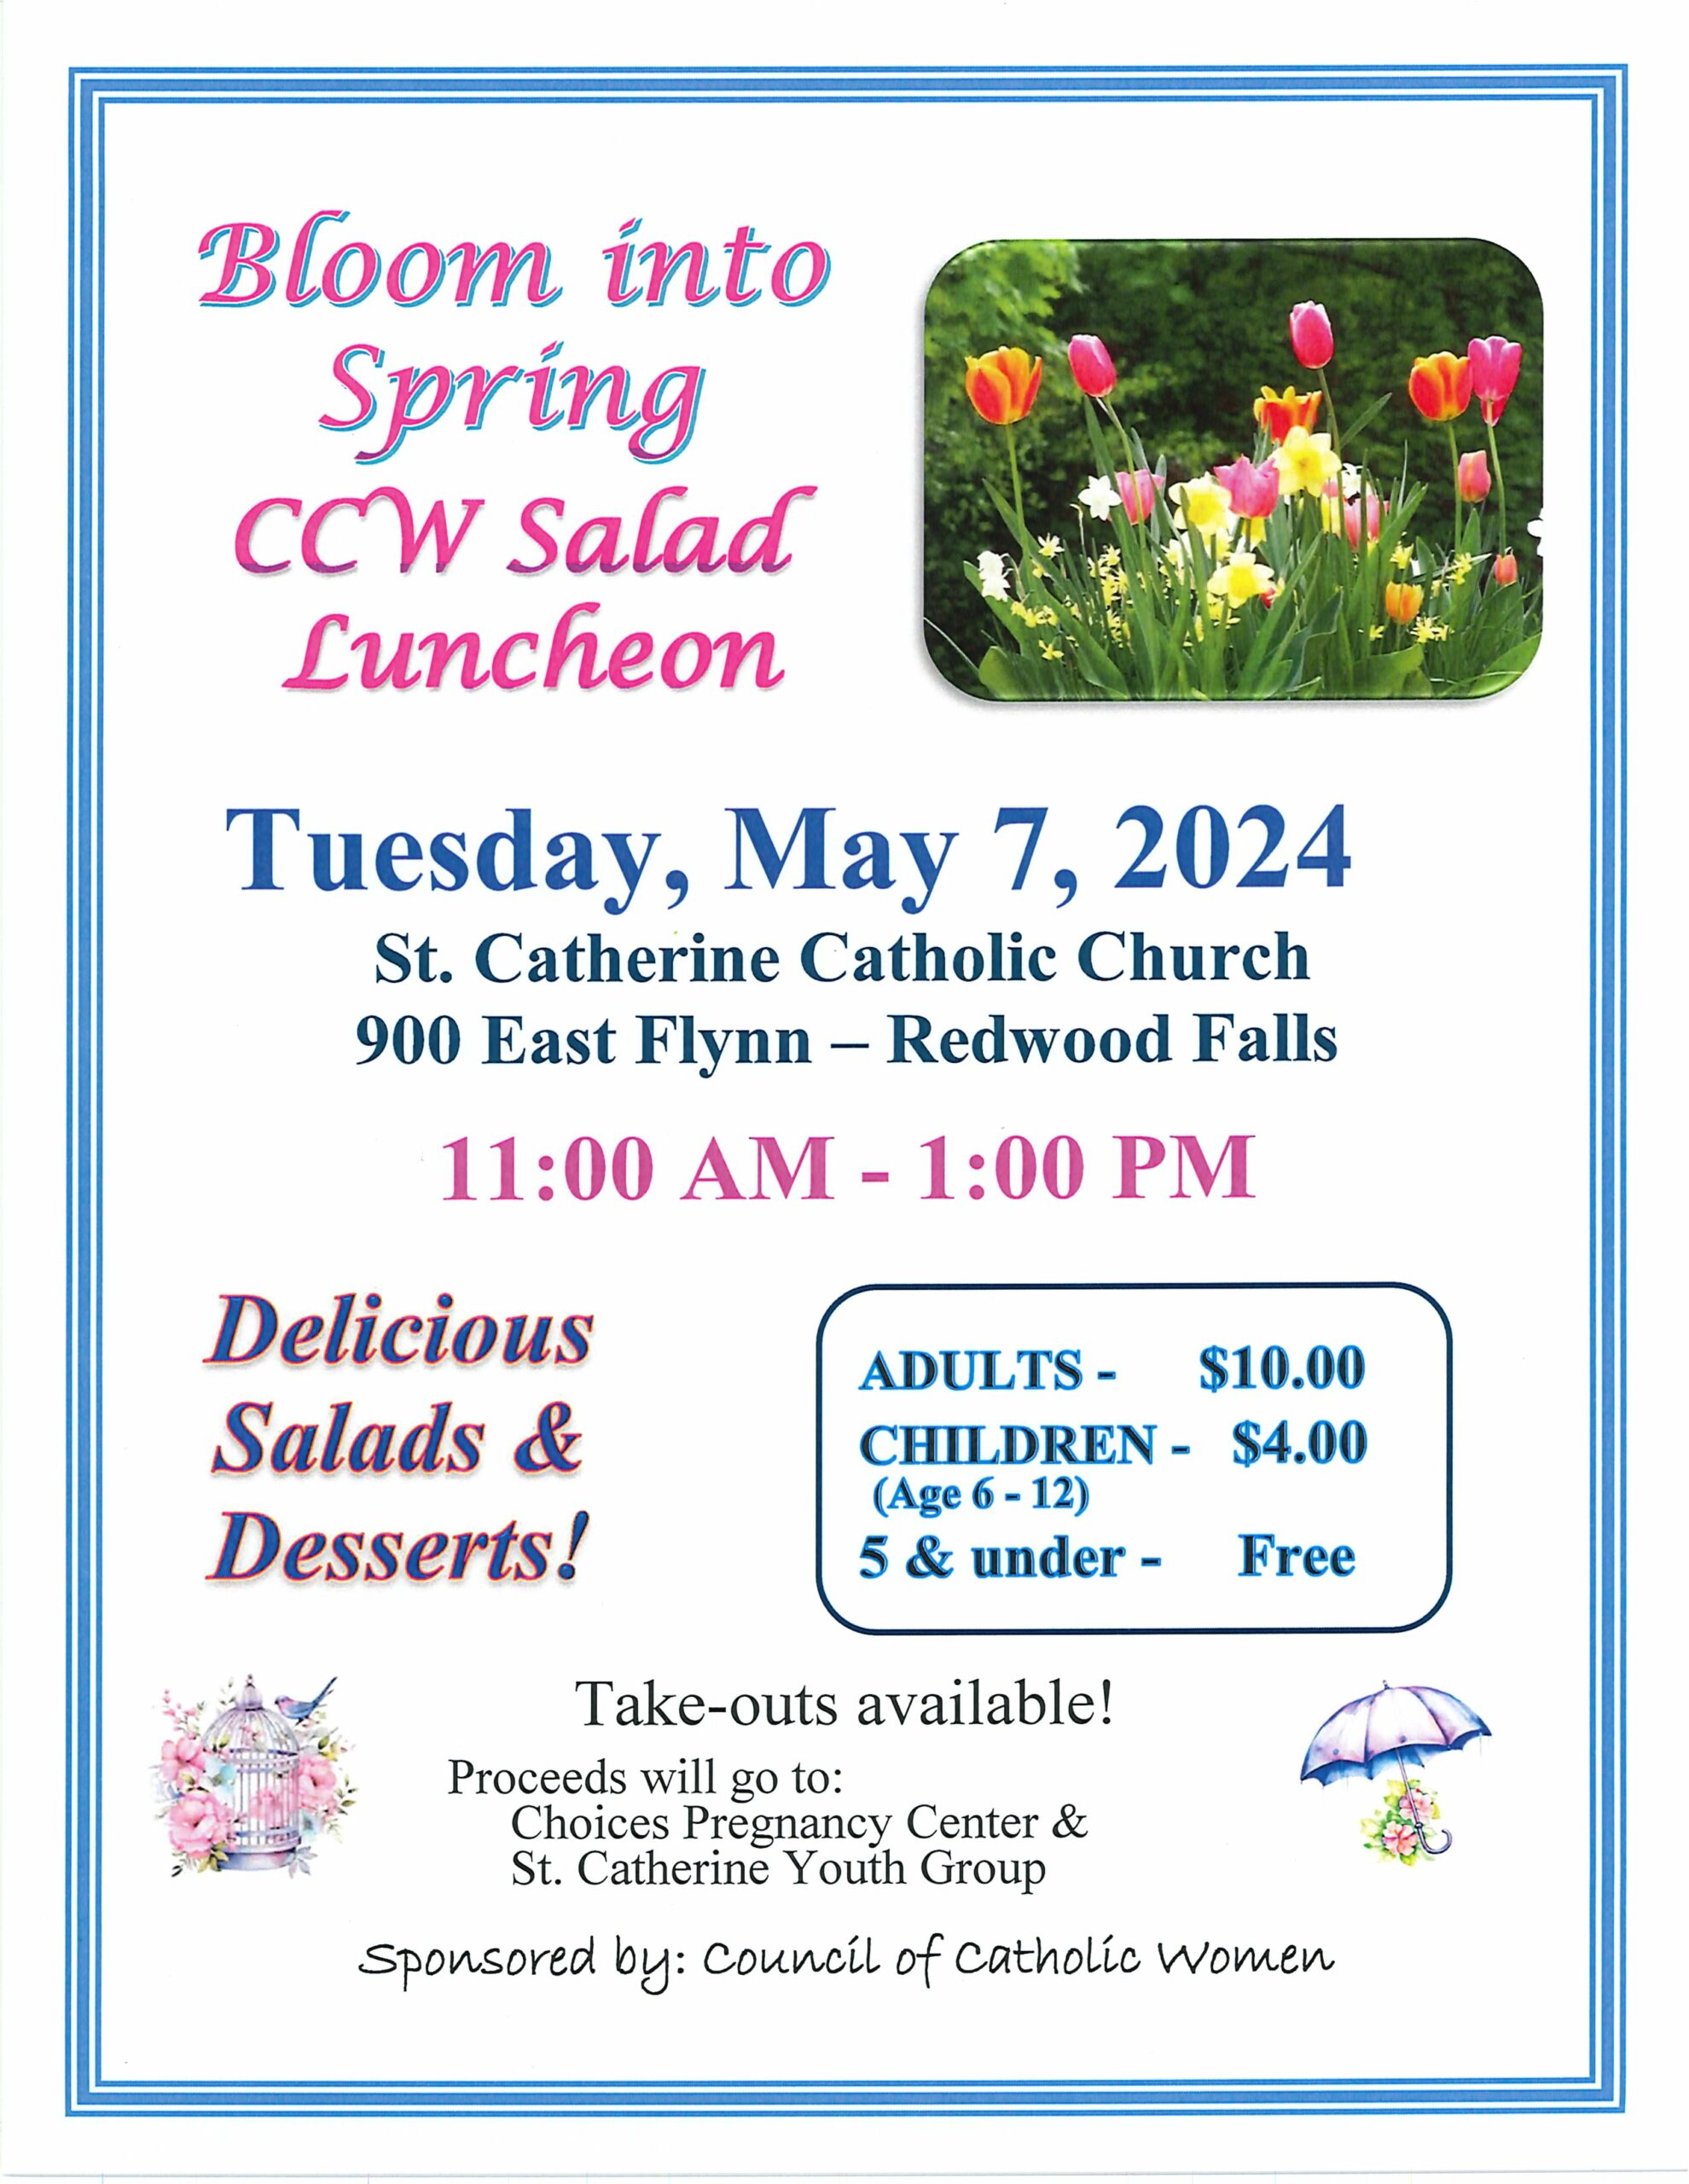 <h1 class="tribe-events-single-event-title">Bloom into Spring CCW Salad Luncheon</h1>